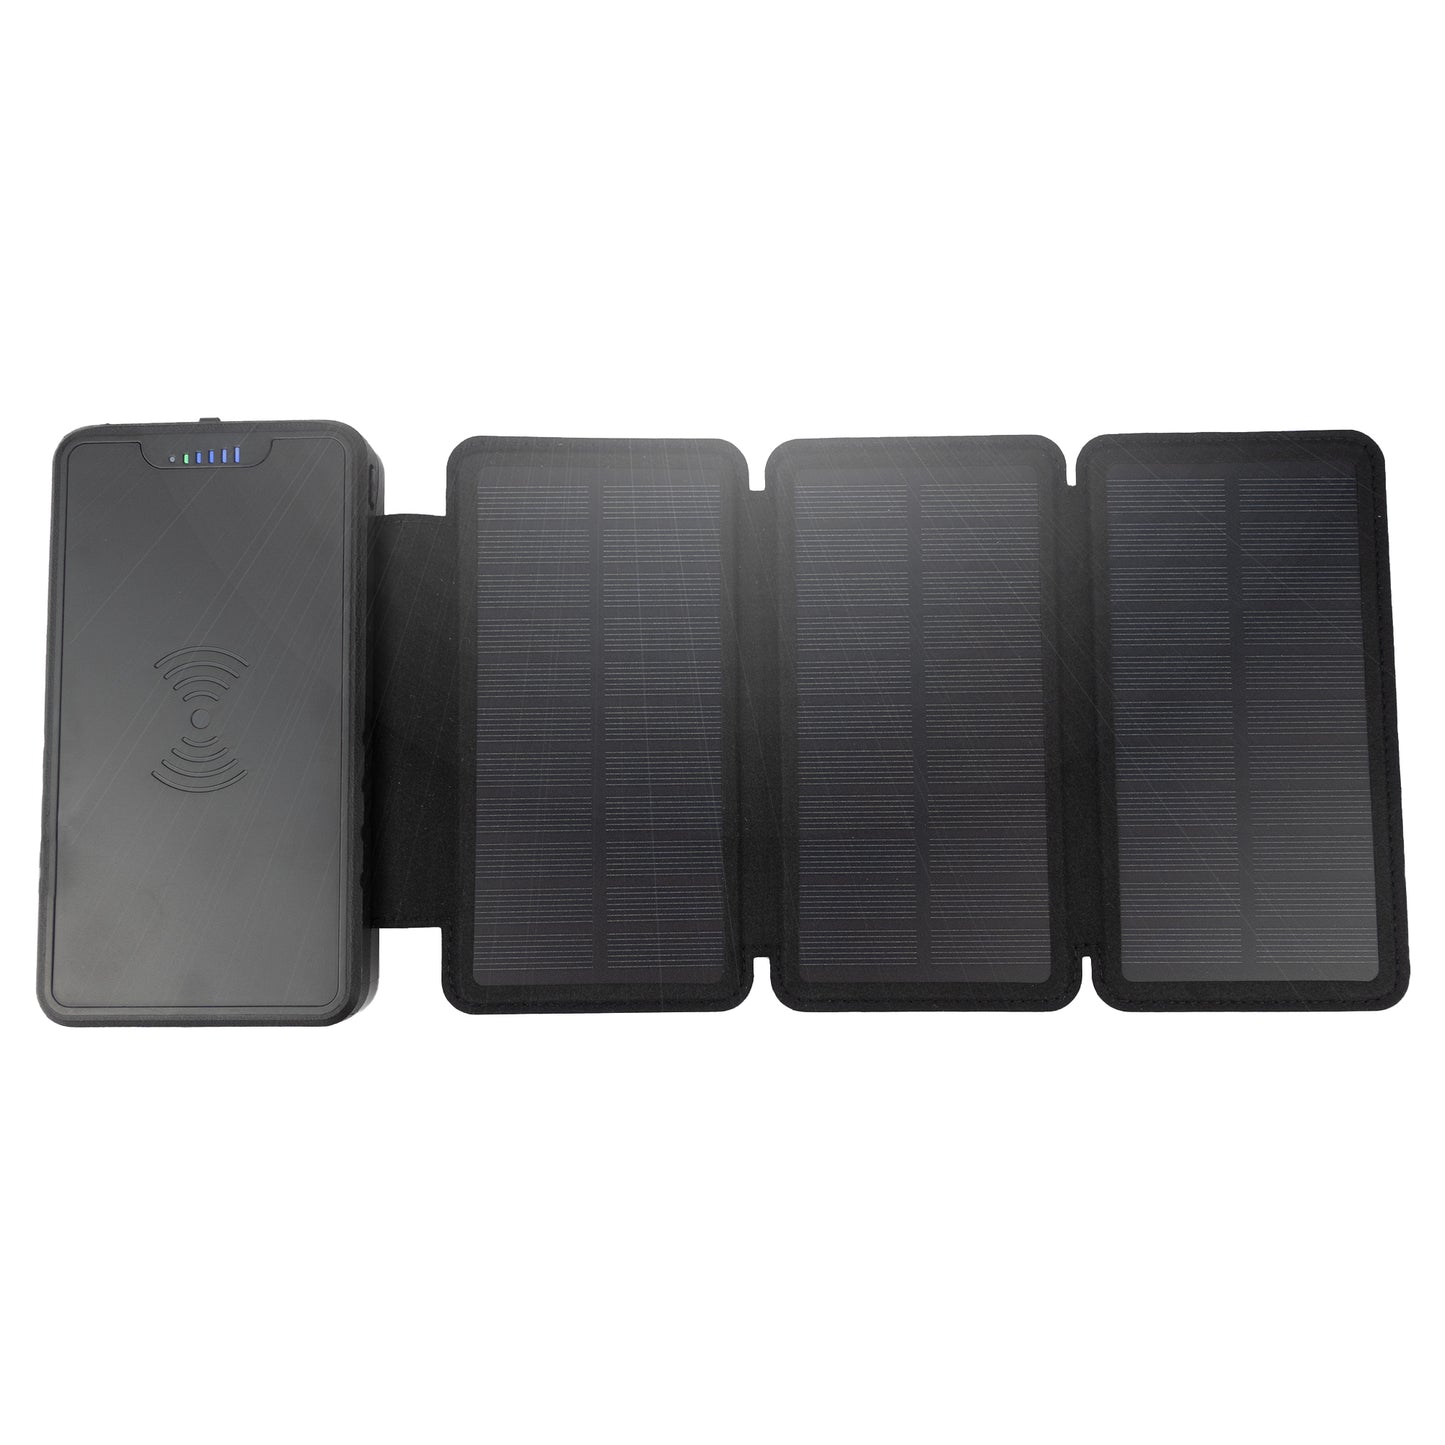 [ Bulk Pack of 5 ] Tough Light 820W 3 Panel USB Solar Power Bank Charger - 20,000mAh Li Polymer with WIRELESS Phone Charging - 2AMP High Speed Cable Included